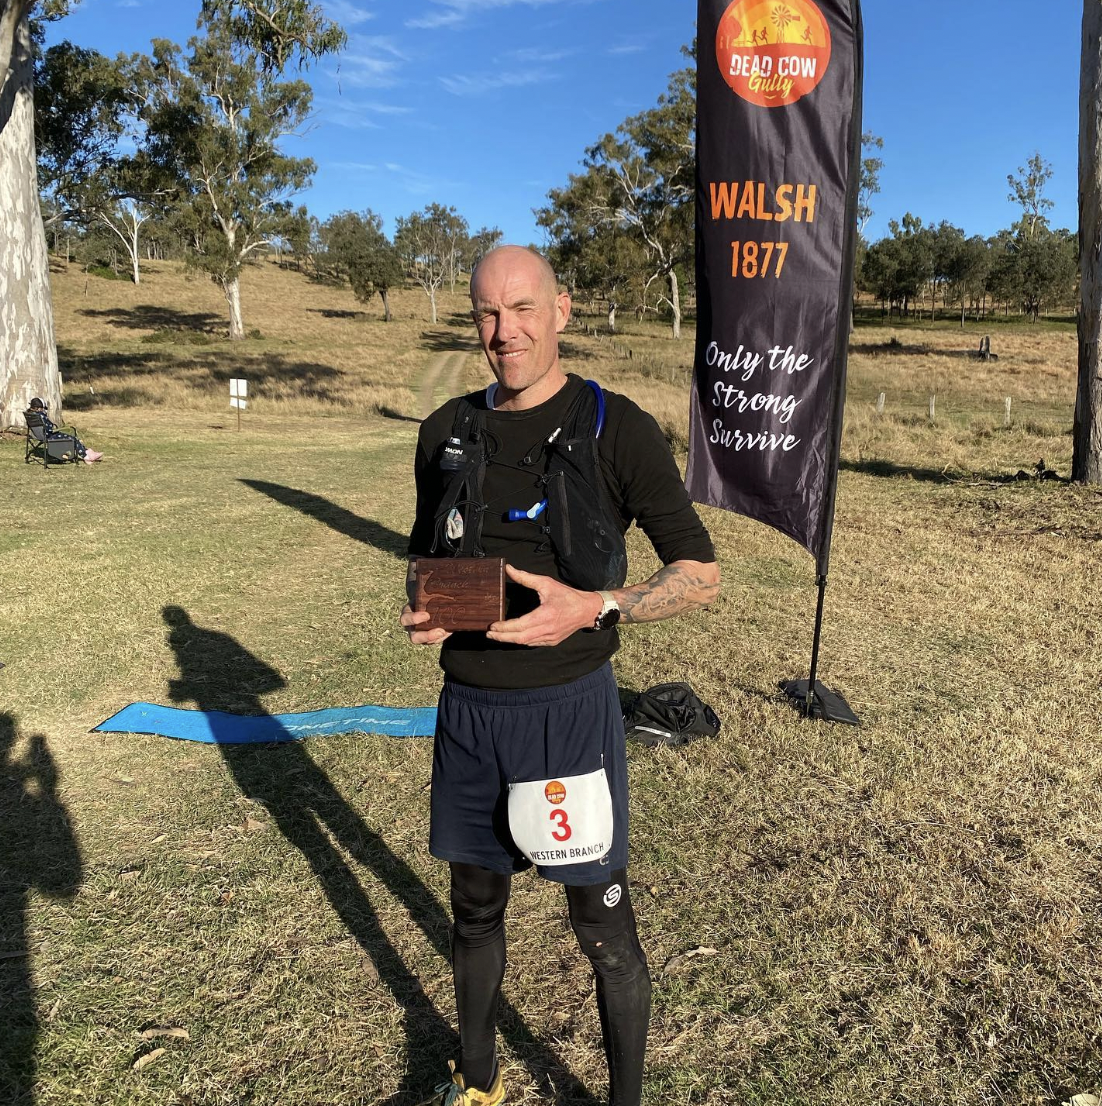 Ryan Crawford at the finish line of Dead Cows Gully